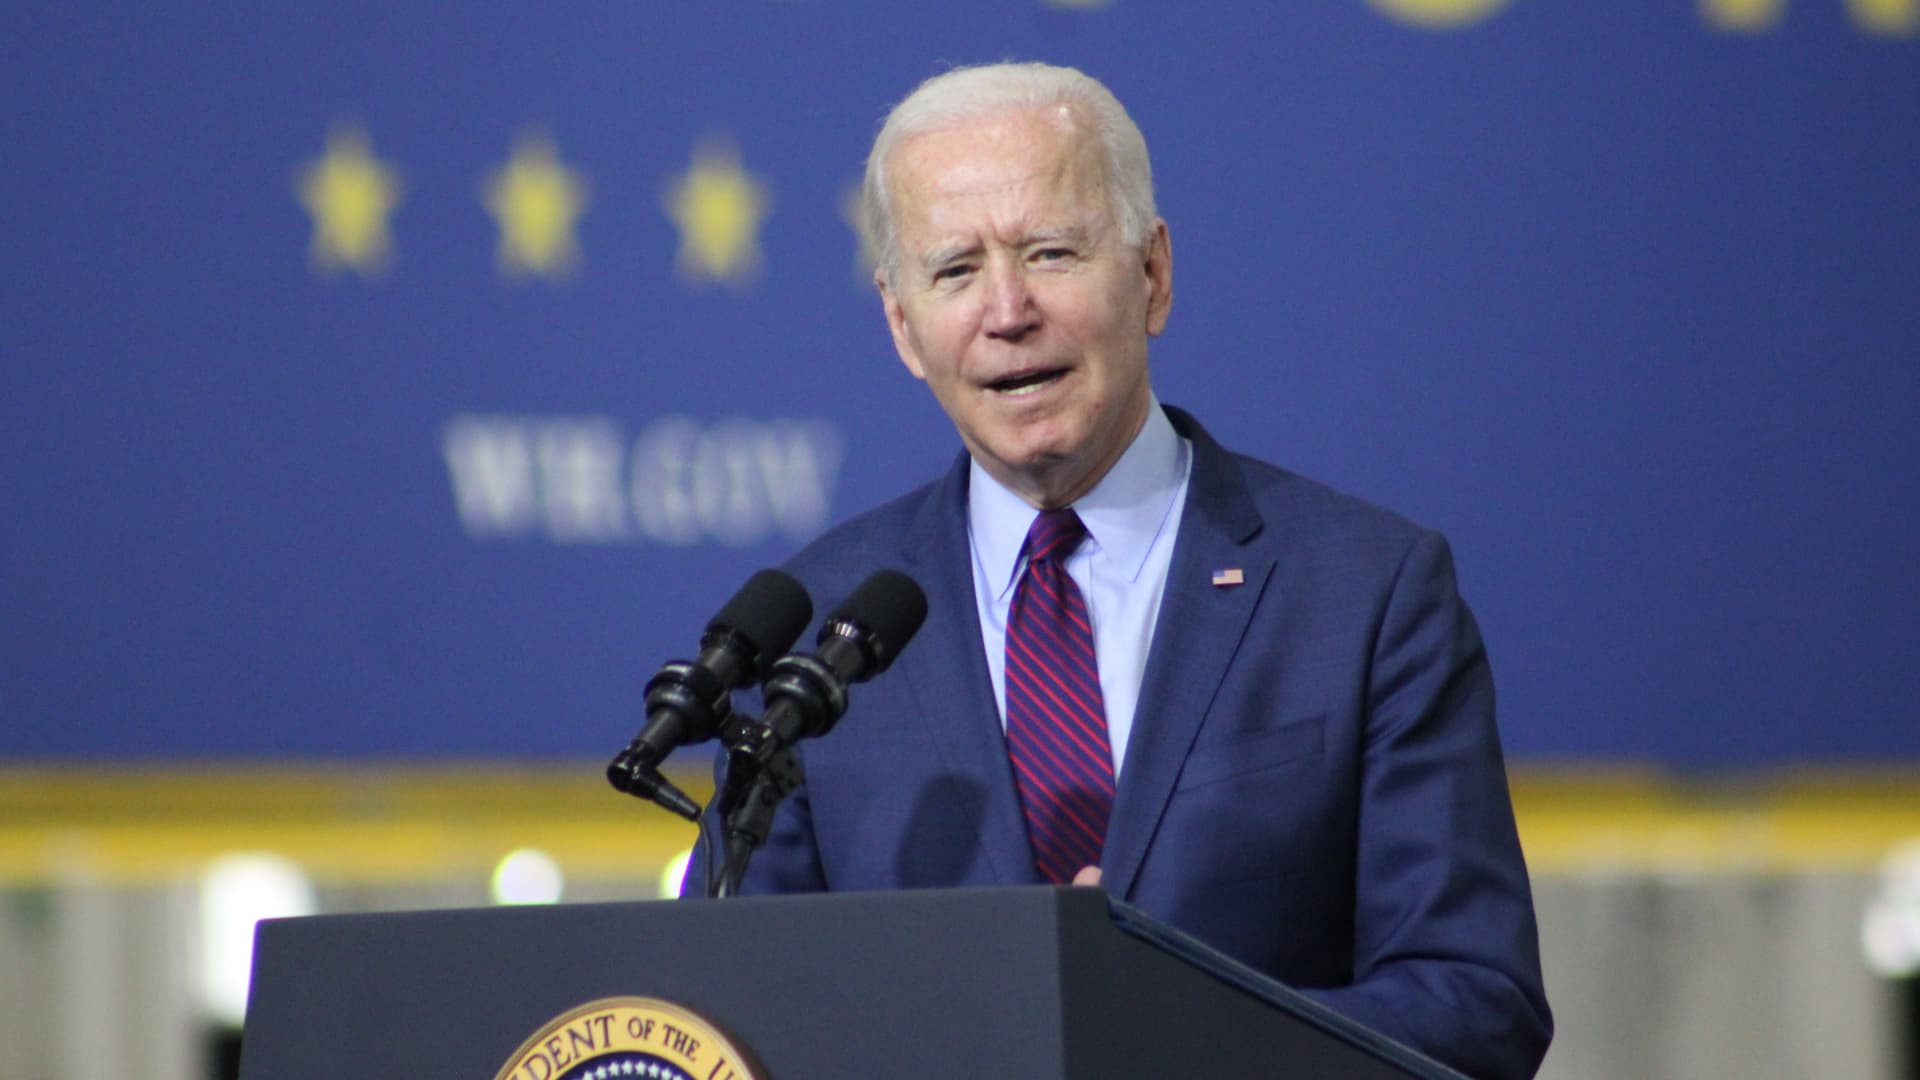 Russia is exploring options for cyberattacks and companies must be ready, says Biden